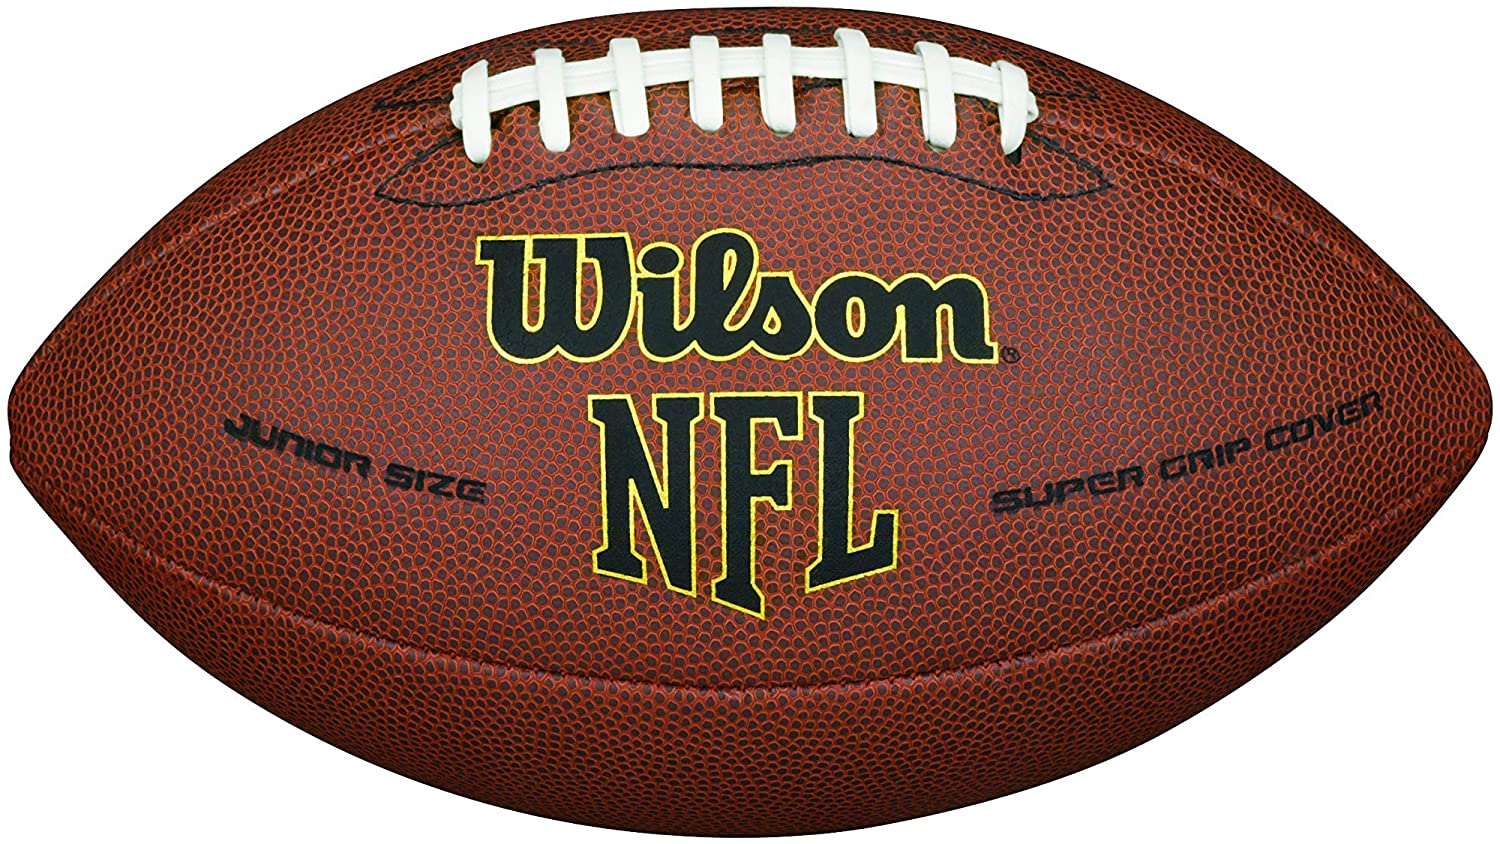 WILSON All-Weather Youth Size Super Grip NFL Football